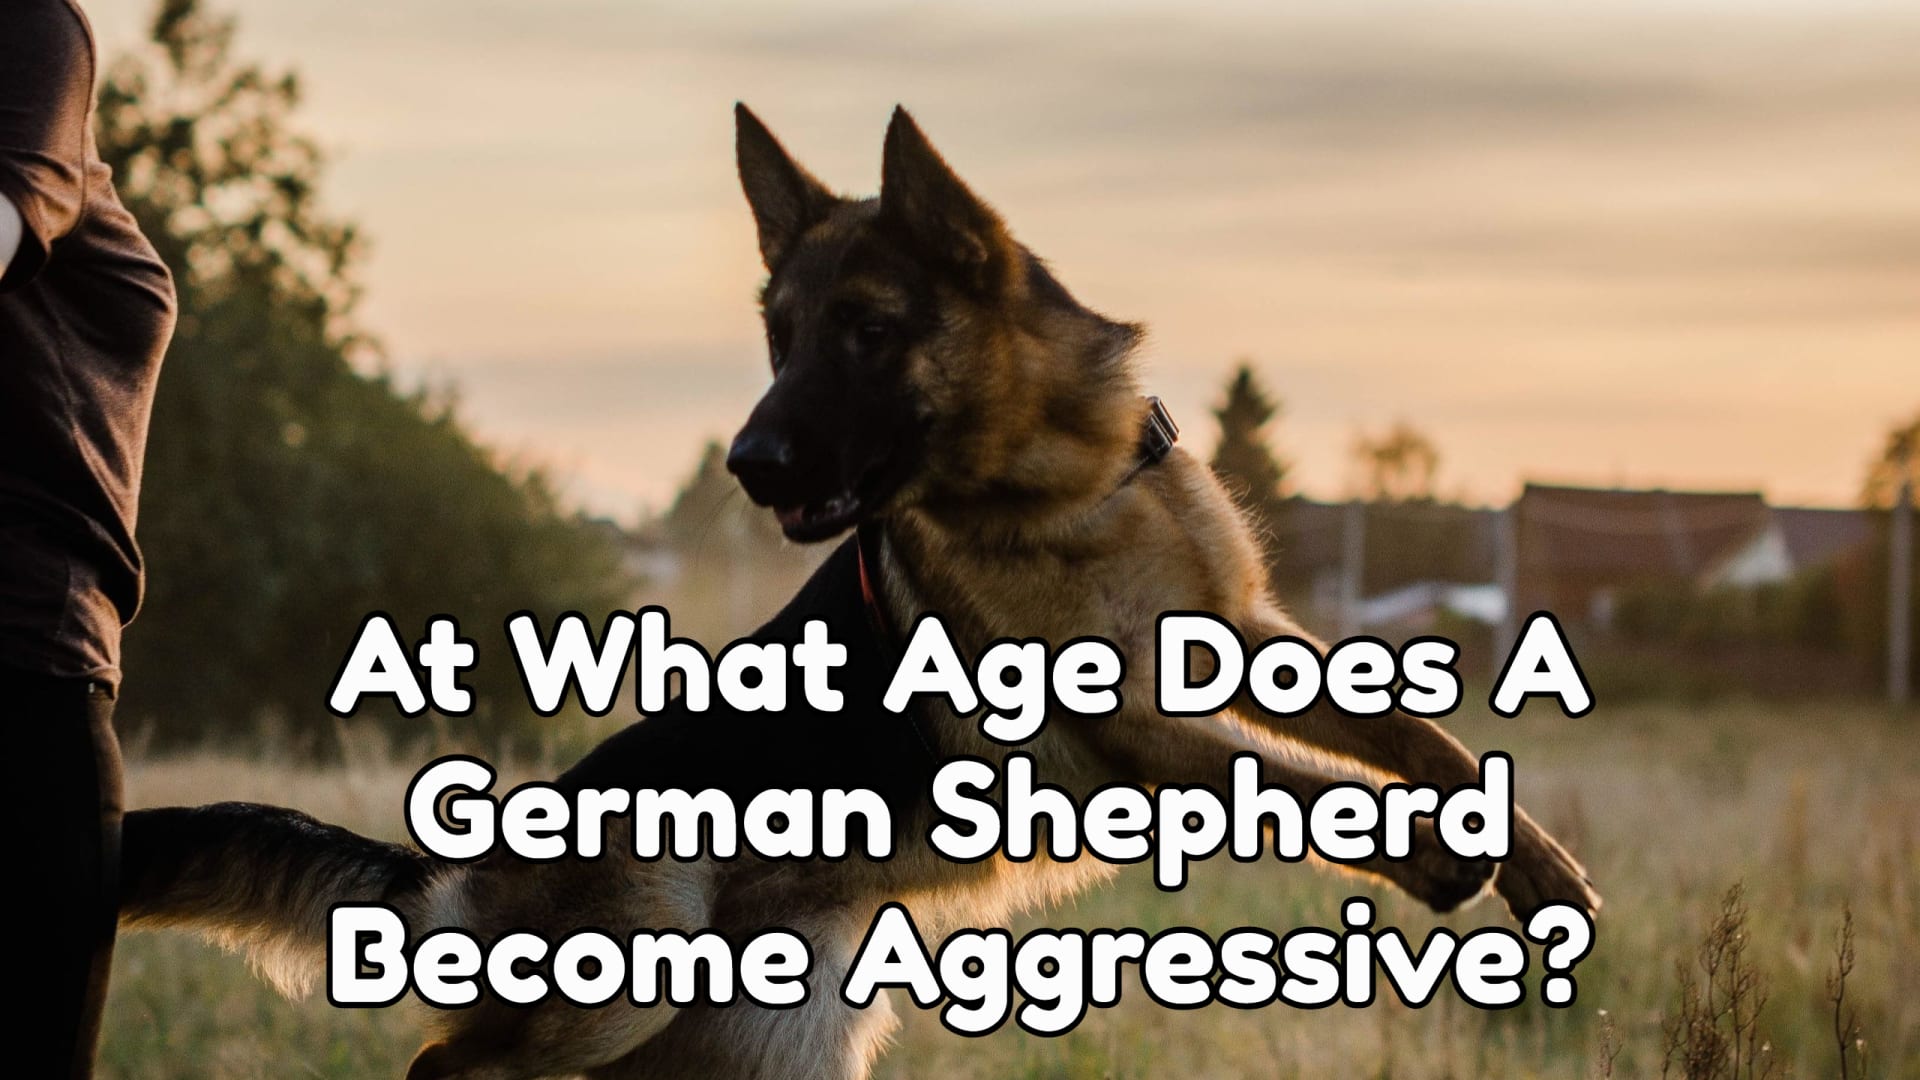 At What Age Does A German Shepherd Become Aggressive?